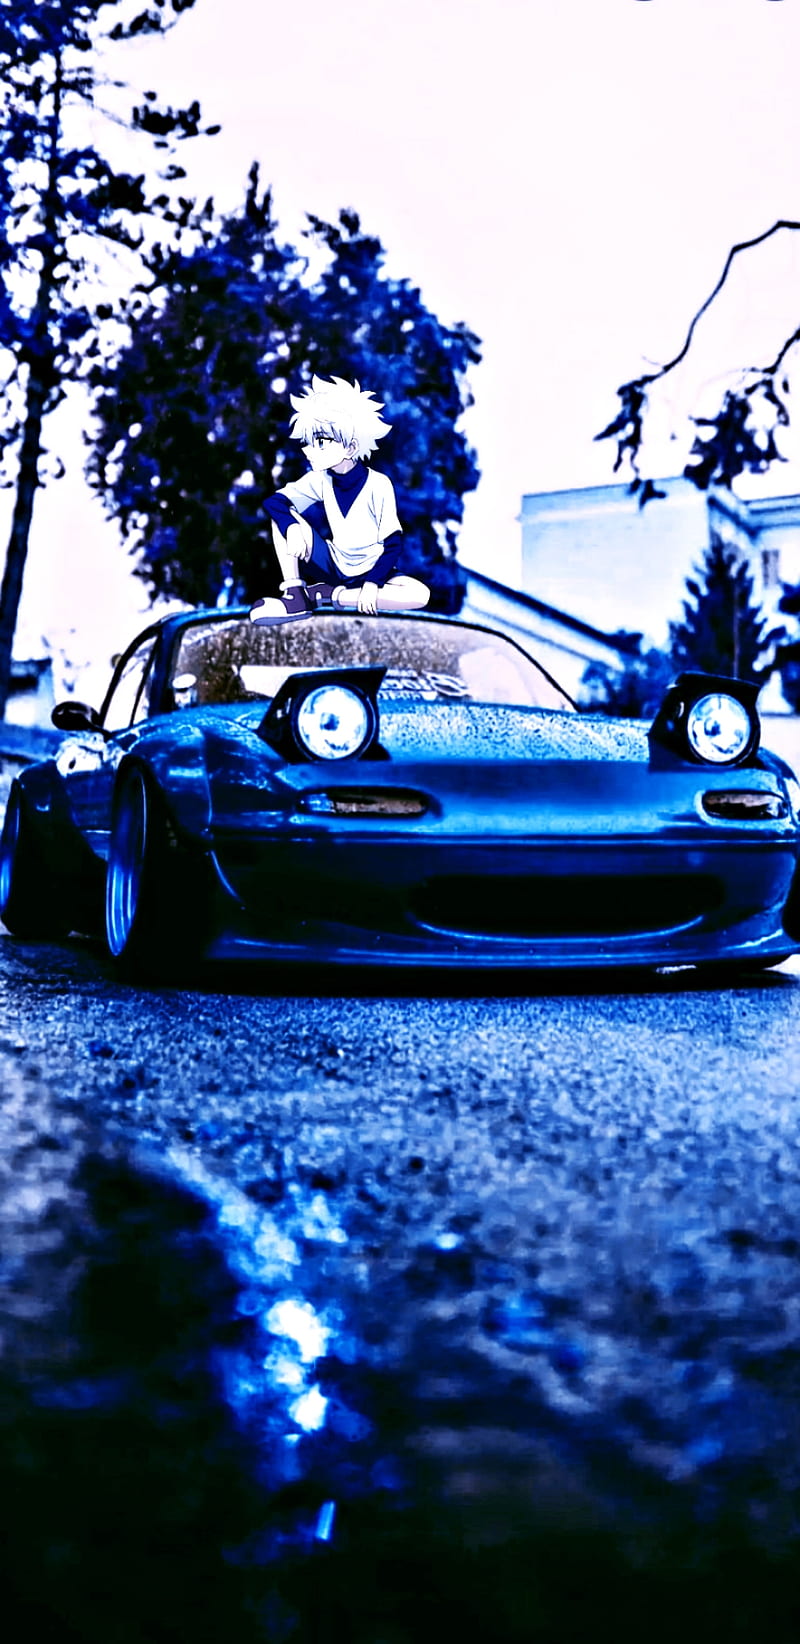 Anime JDM Cars Wallpapers - Wallpaper Cave